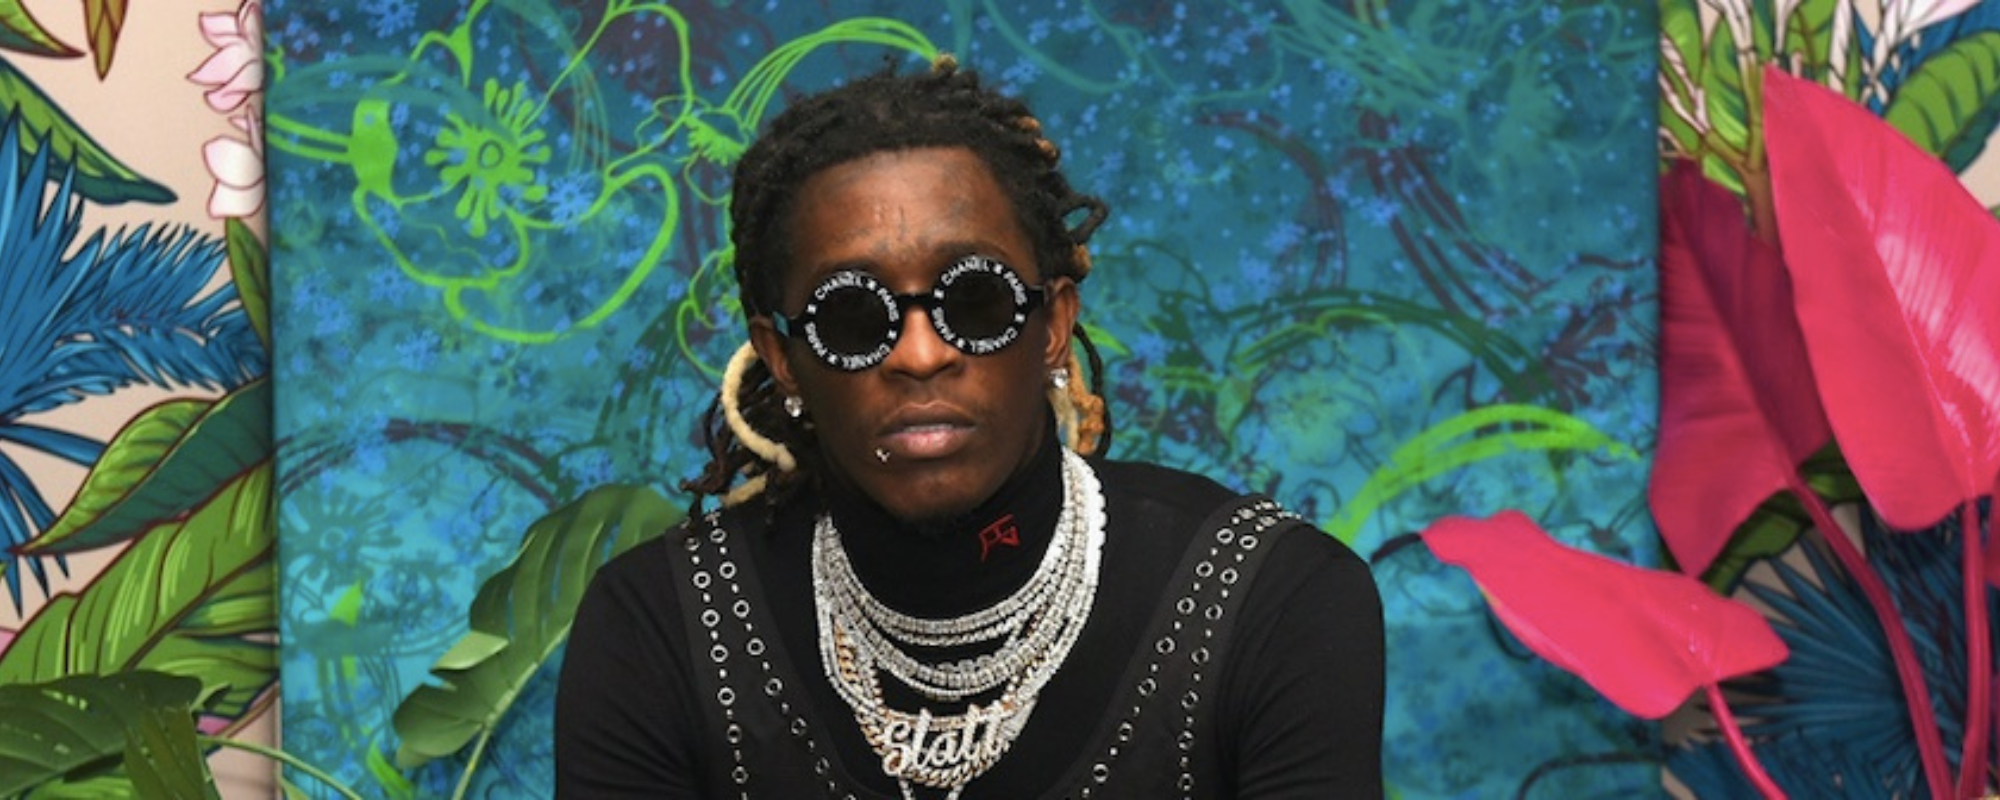 Recap: The First Few Days of Young Thug’s RICO Trial